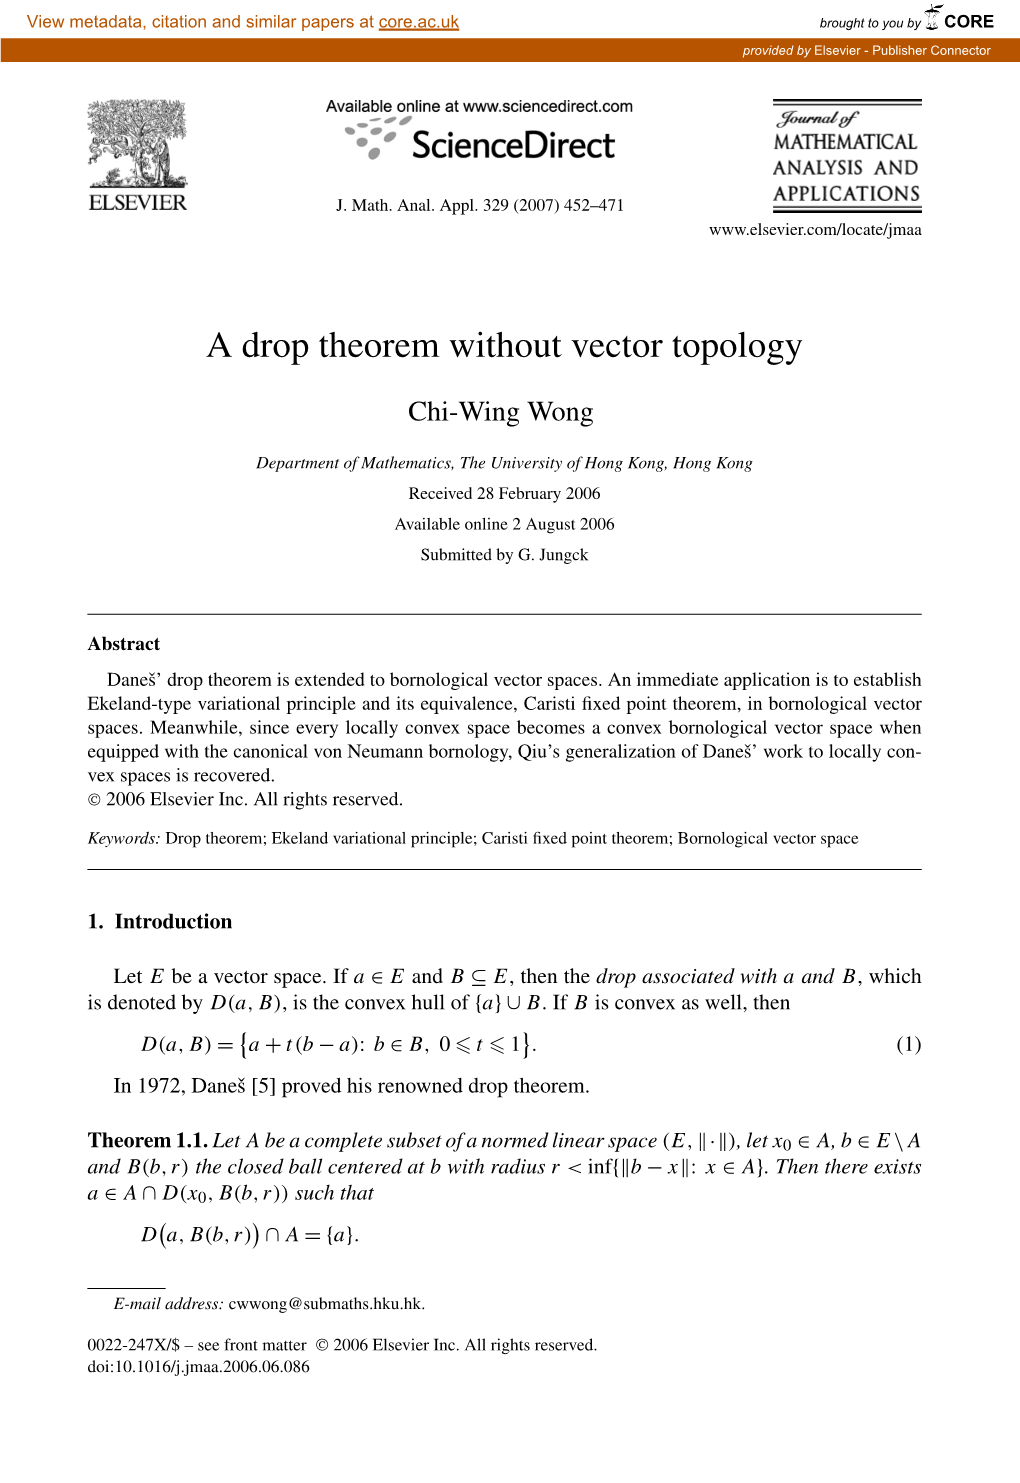 A Drop Theorem Without Vector Topology